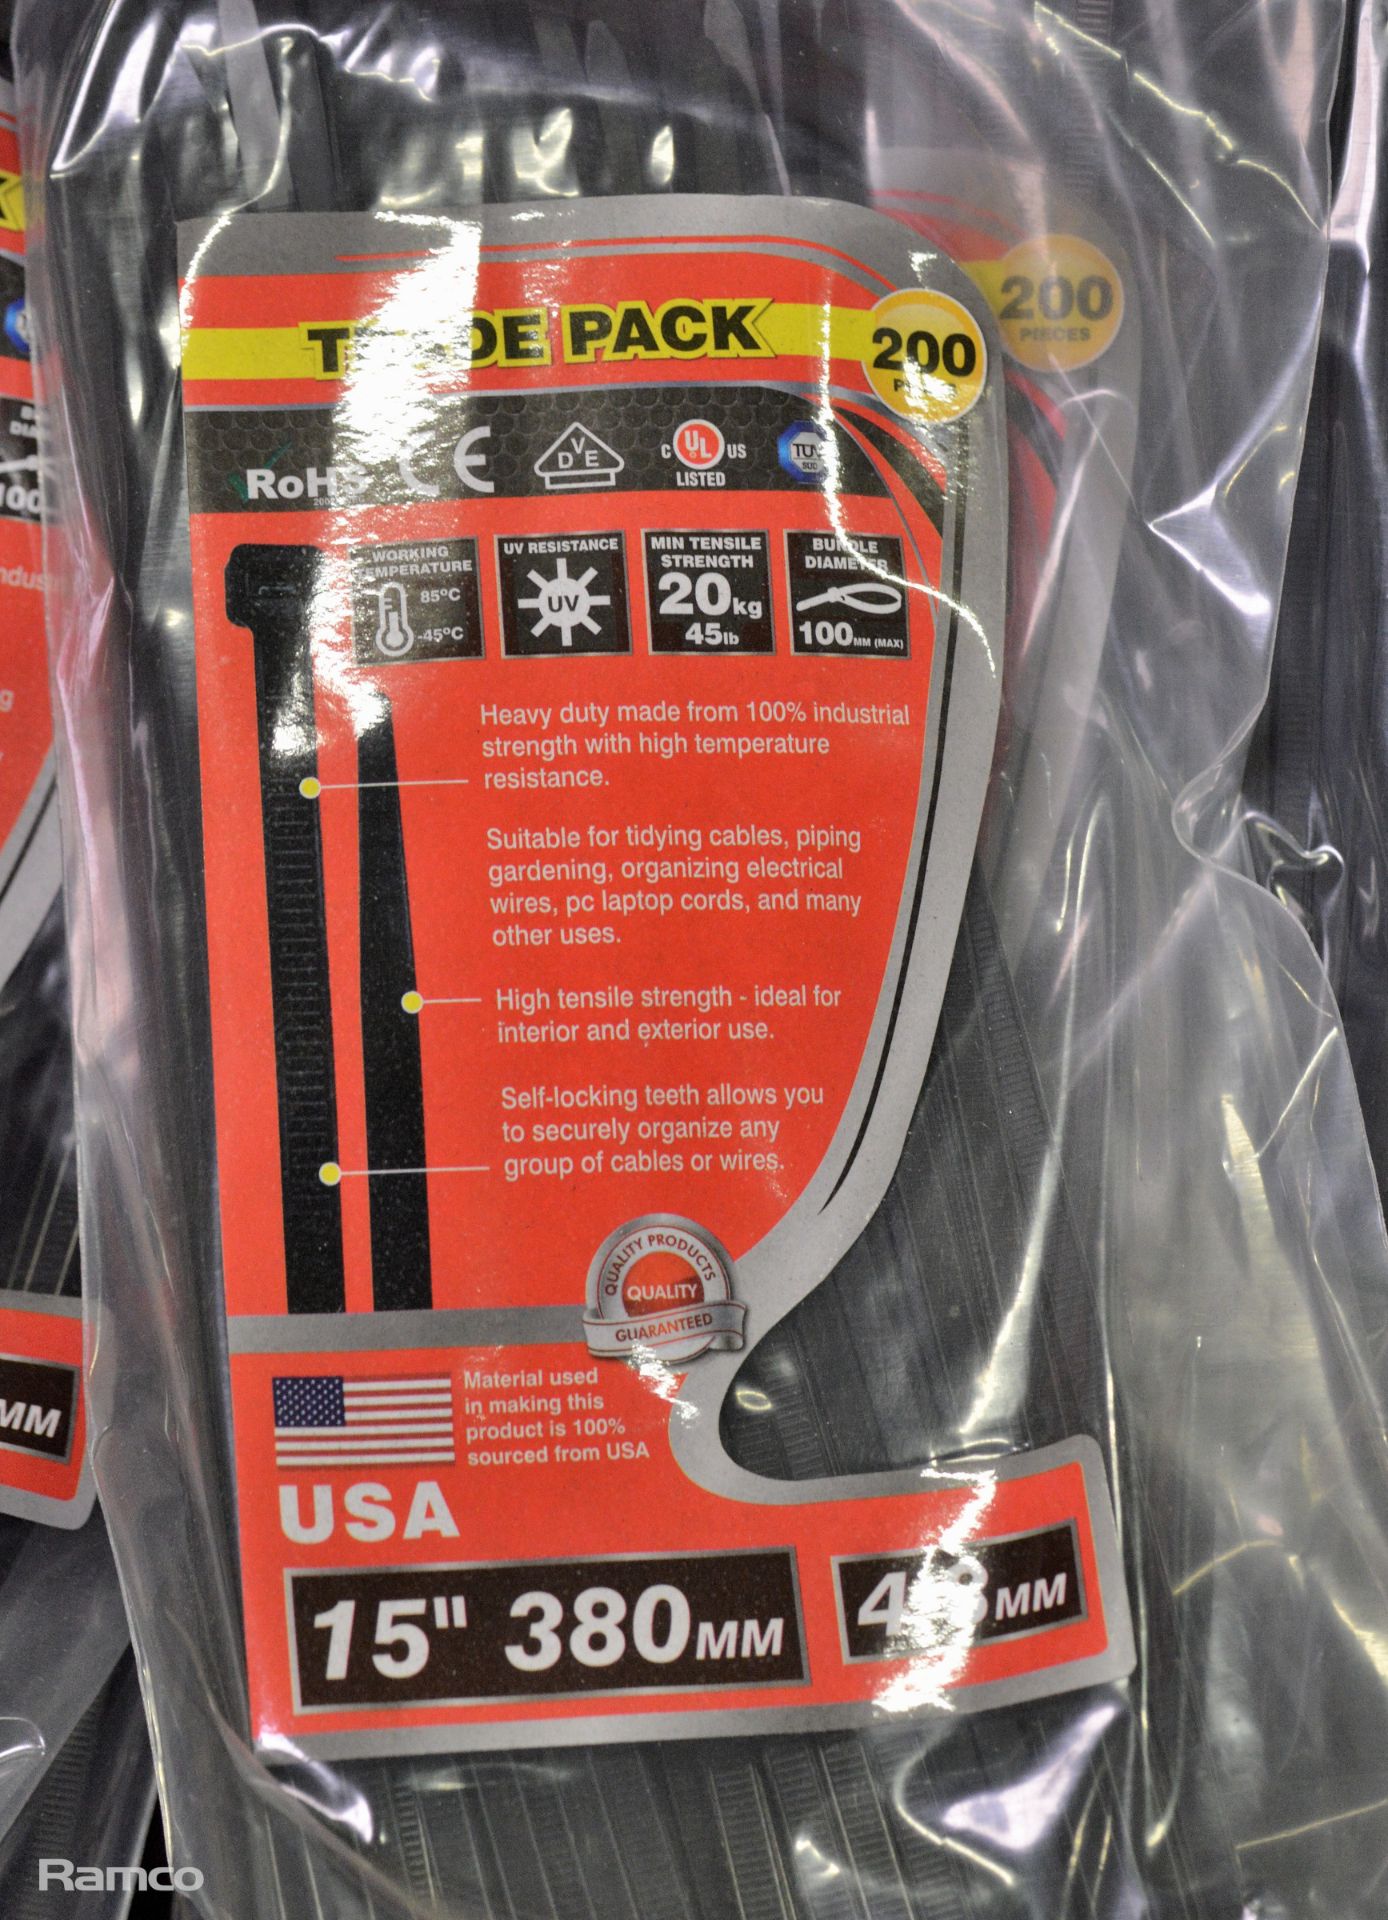 Cable ties - black - 15 inch / 380mm - 200 per pack - 6 packs - Image 2 of 2